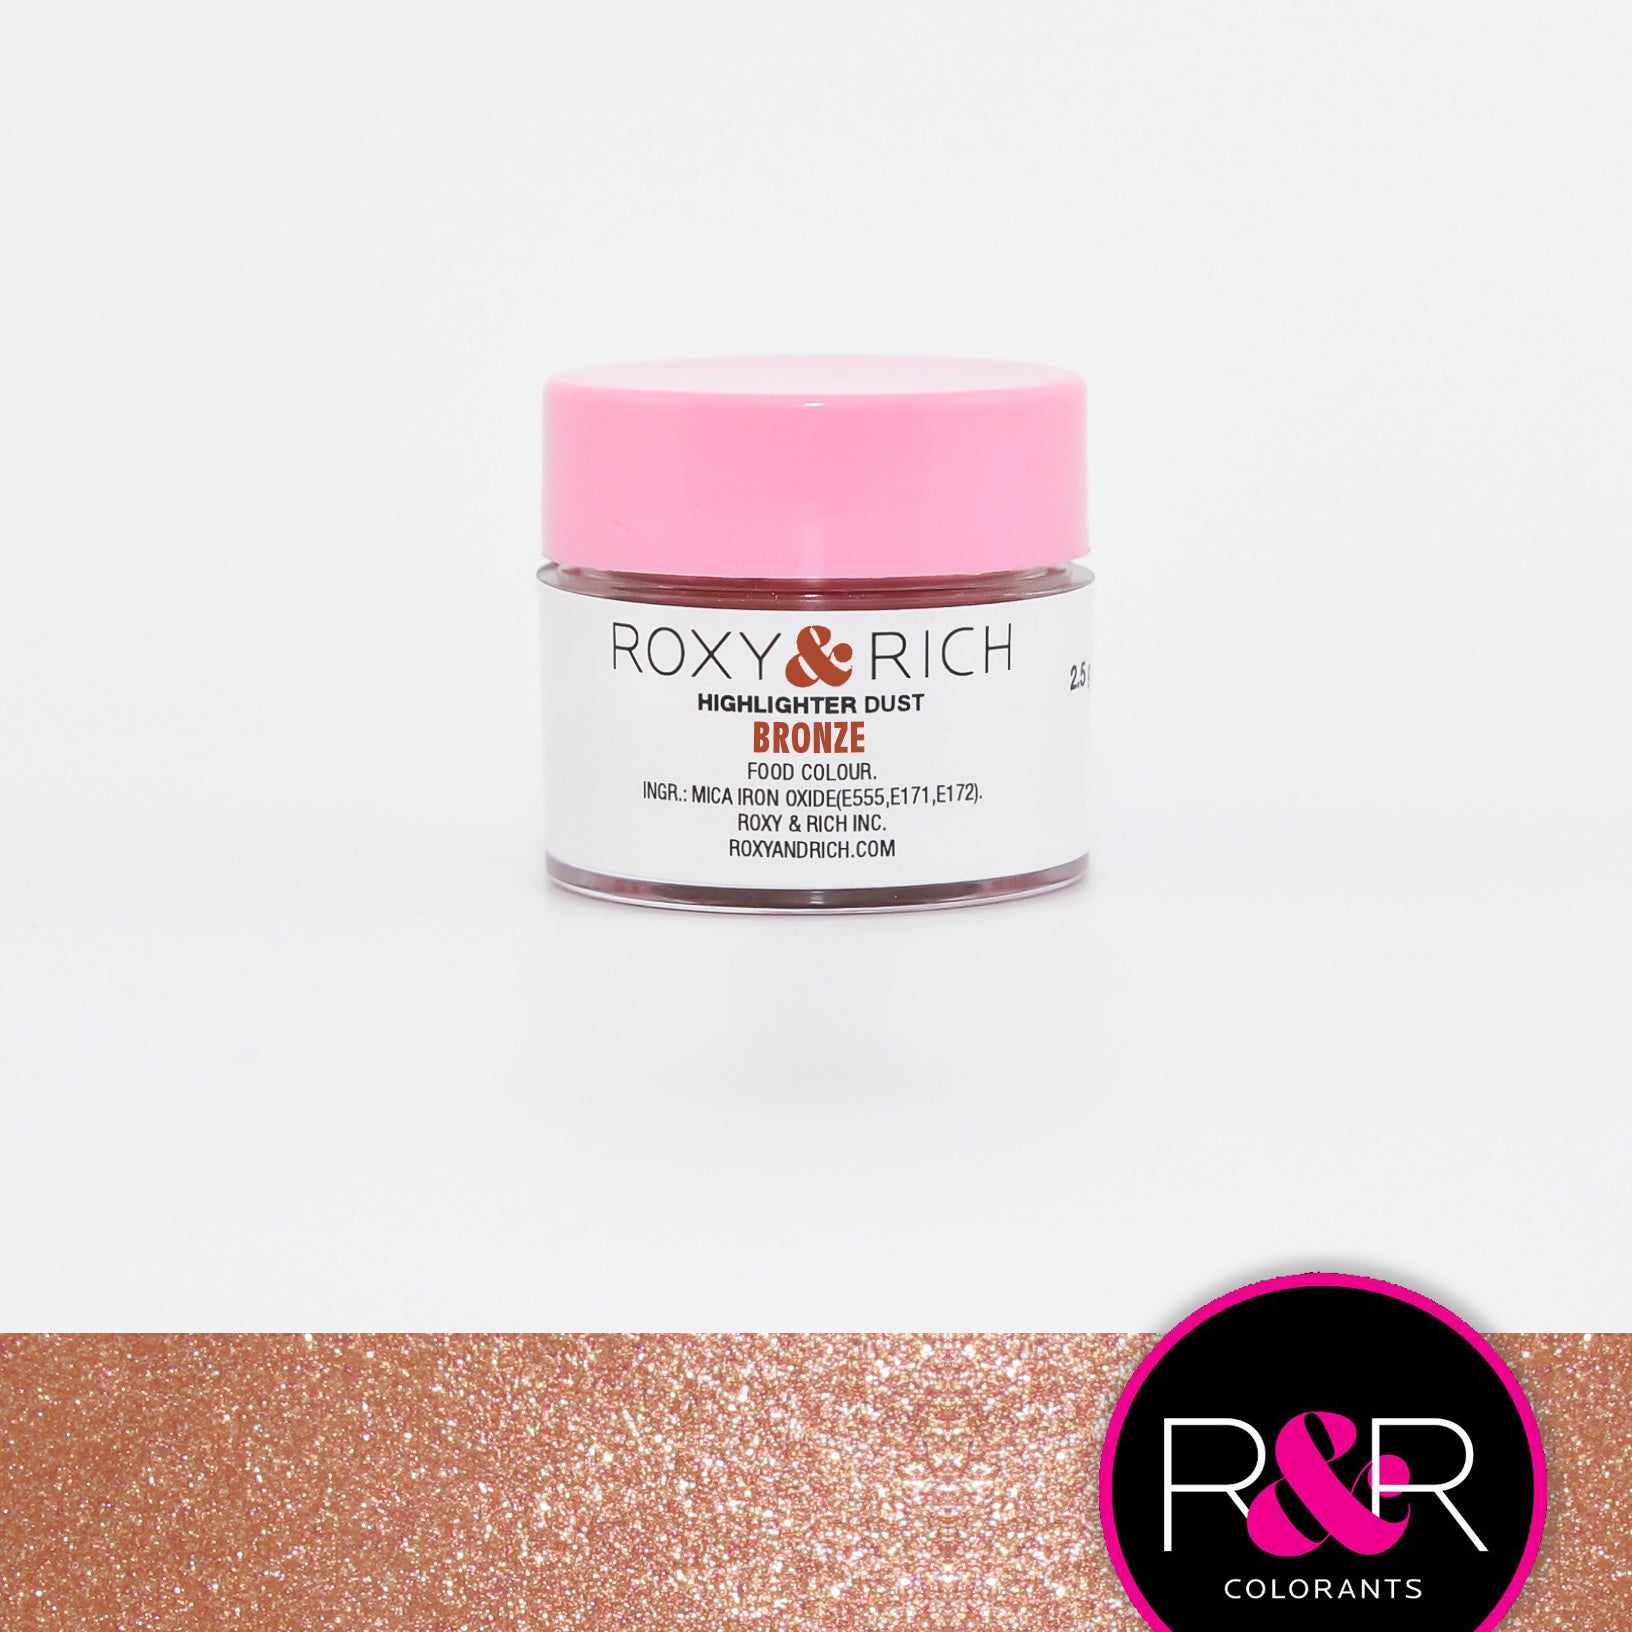 Poudre Highlighter couleur Bronze    - Roxy & Rich - Poudre Highlighter - 